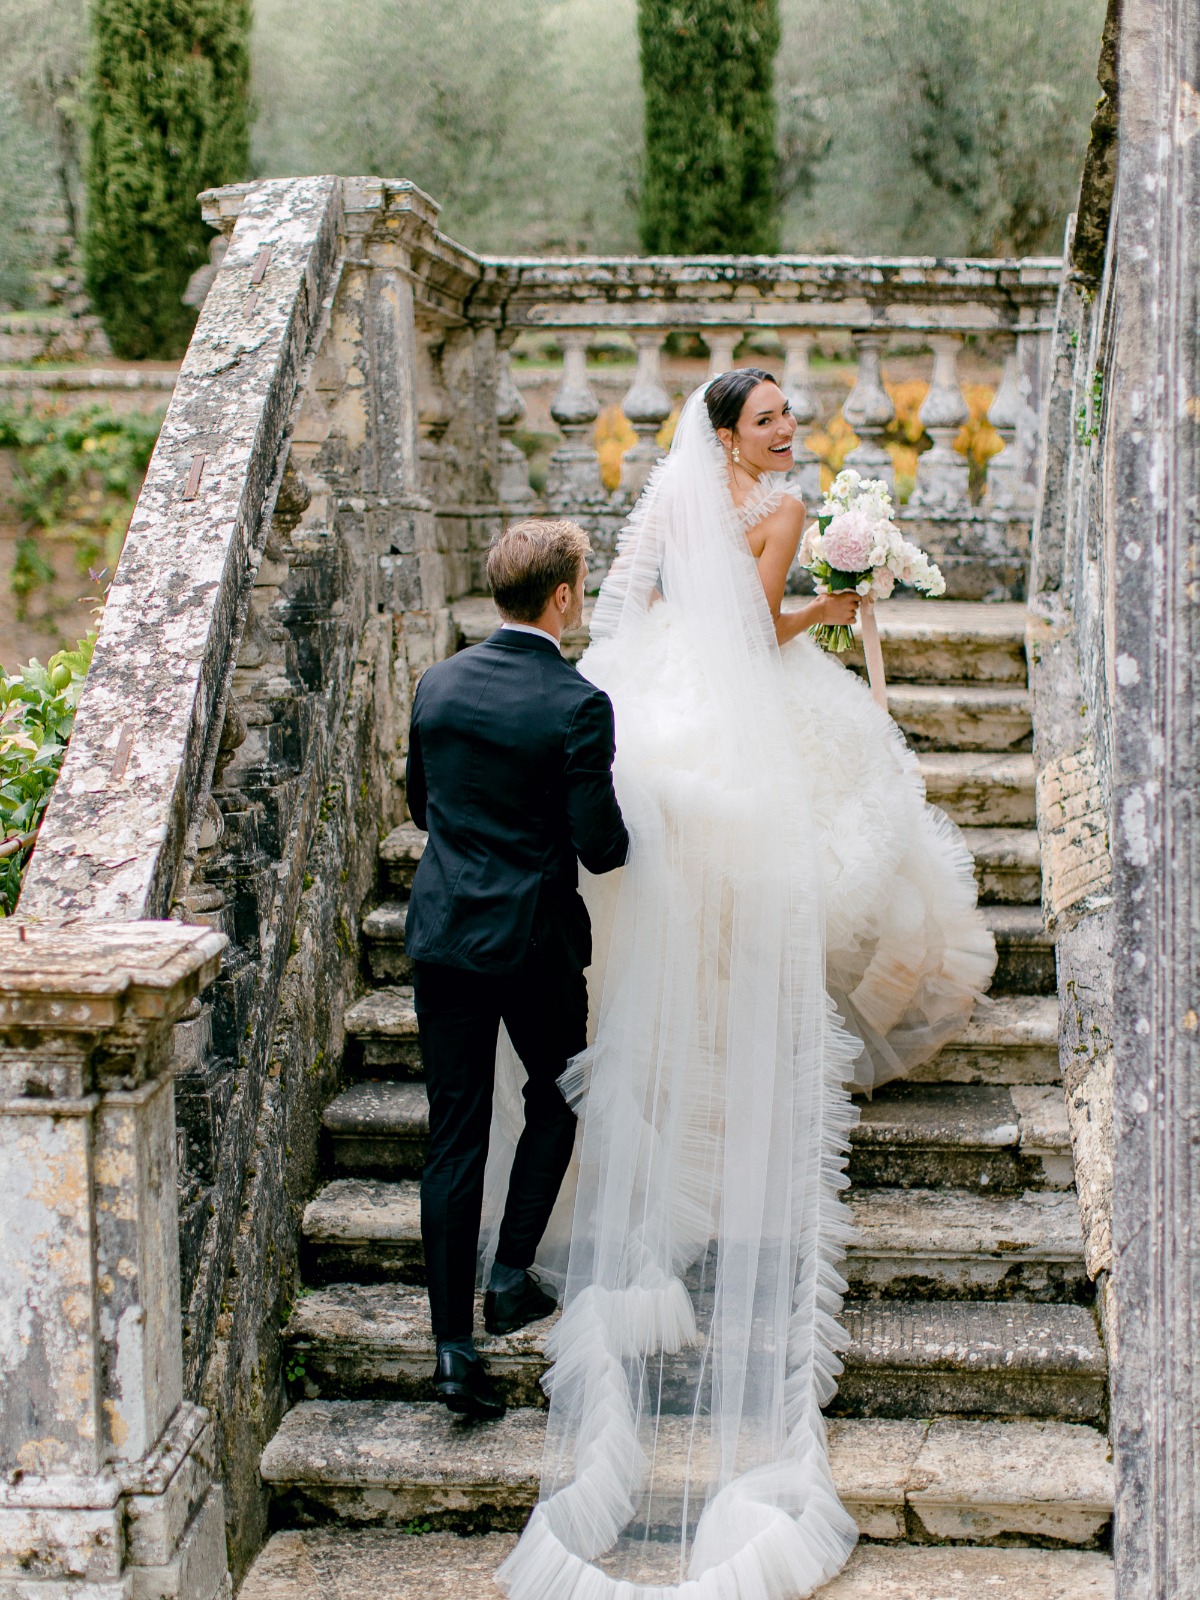 Is This Styled Shoot In Tuscany Too Good To Be True? No, It's Totally Attainable And These Pros Explain Why